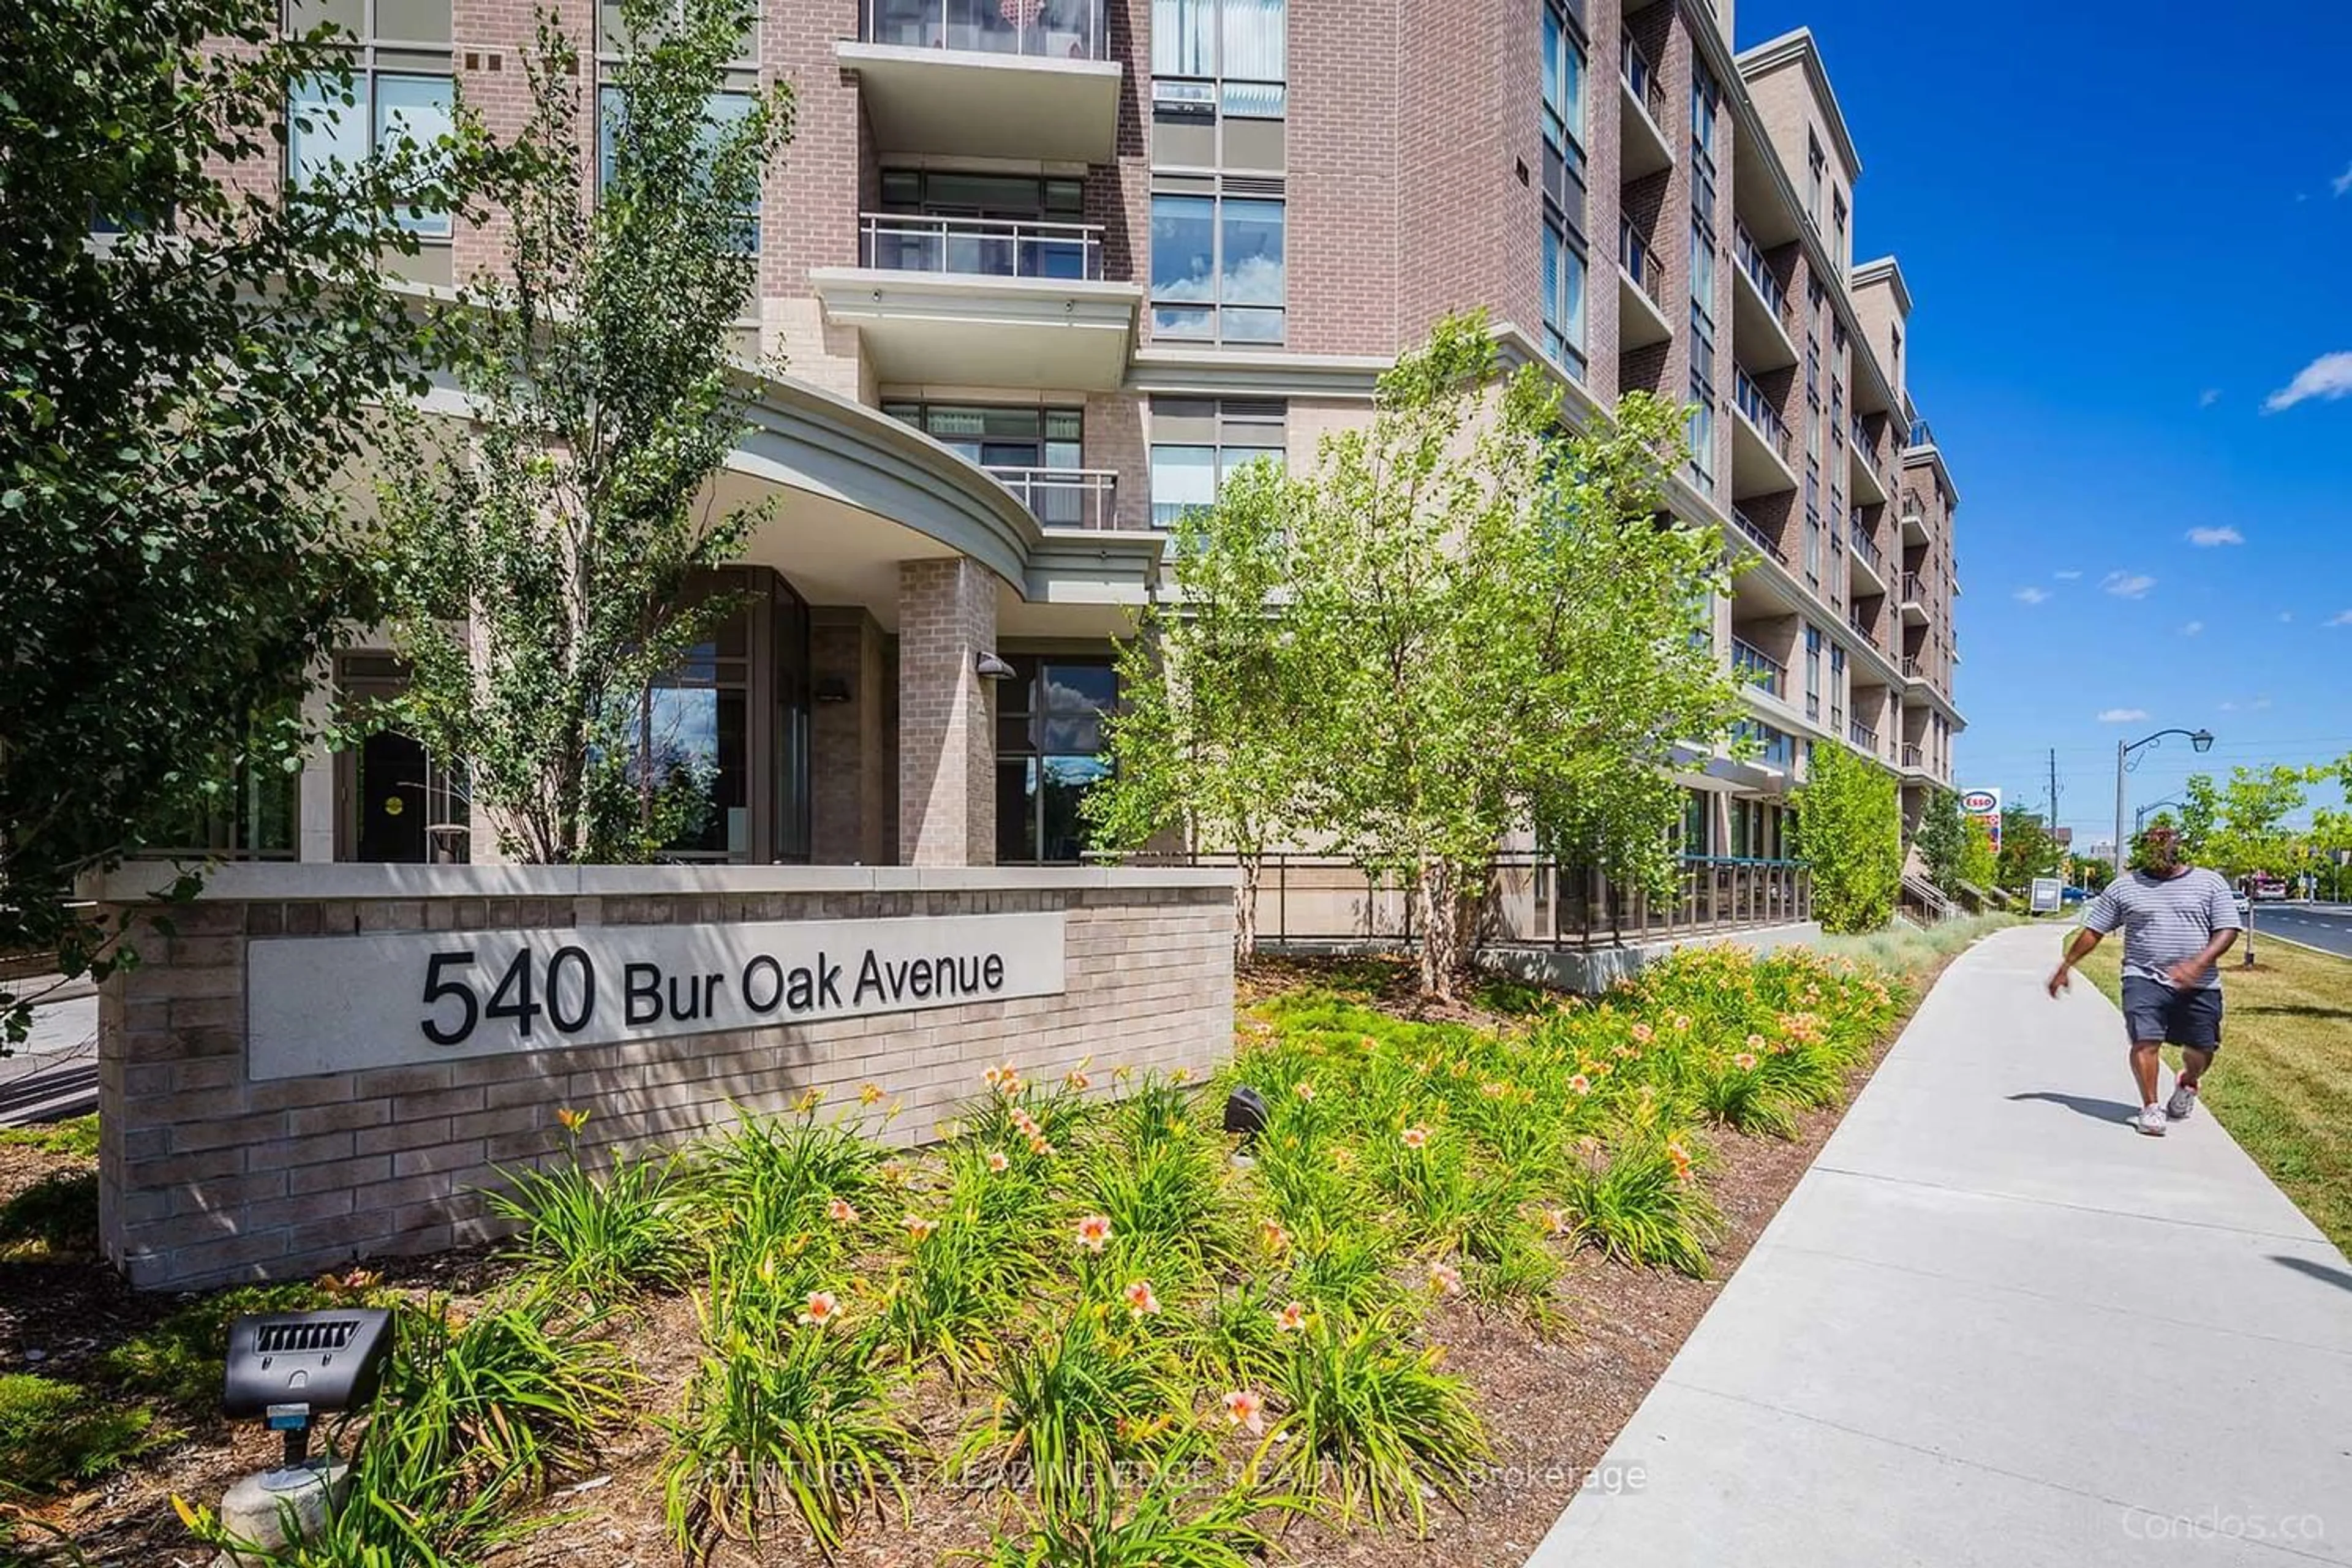 A pic from exterior of the house or condo for 540 Bur Oak Ave #503, Markham Ontario L6C 0Y2